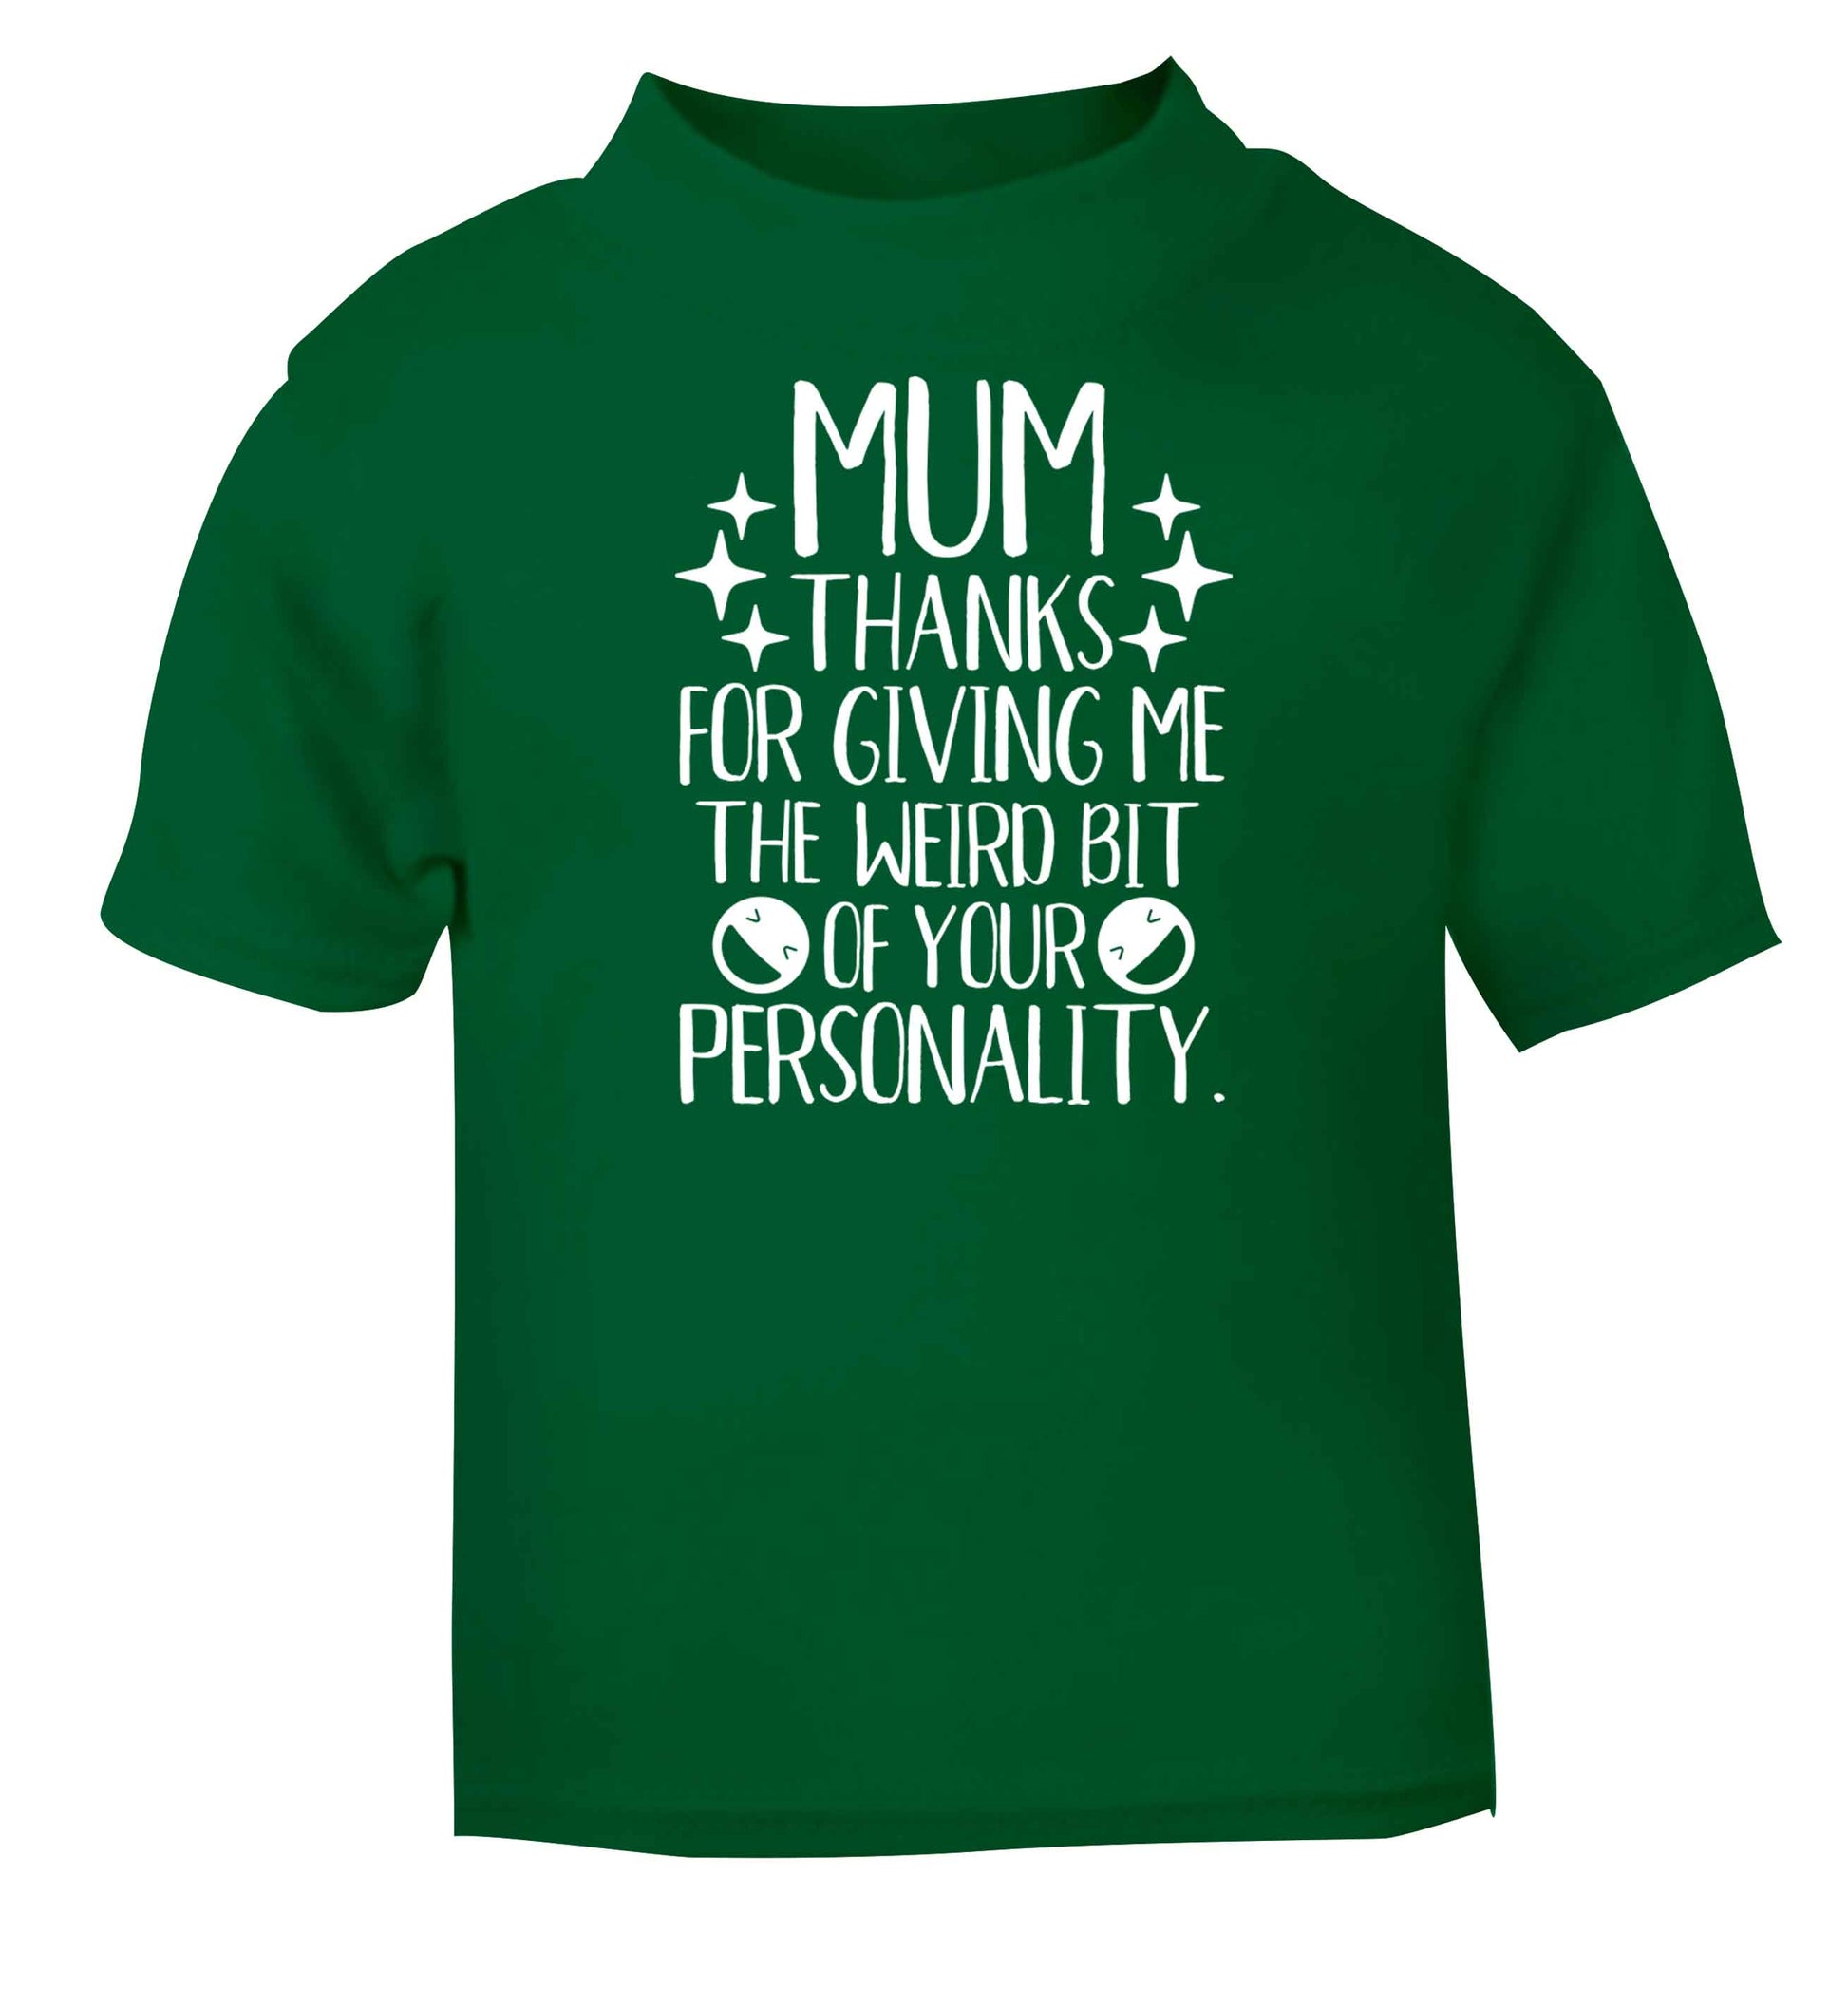 Mum thanks for giving me the weird bit of your personality green baby toddler Tshirt 2 Years